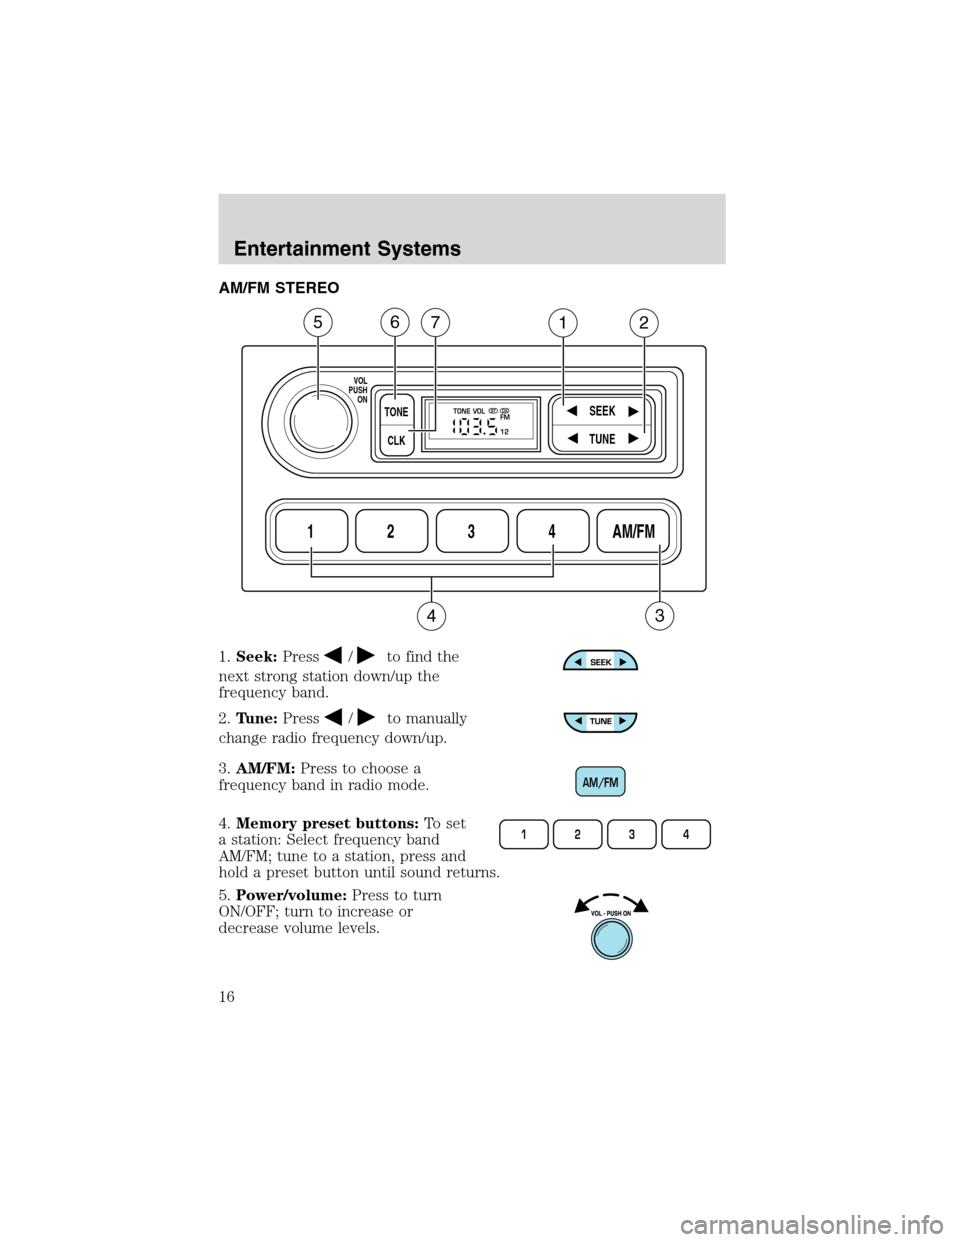 FORD RANGER 2003 2.G Owners Manual AM/FM STEREO
1.Seek:Press
/to find the
next strong station down/up the
frequency band.
2.Tune:Press
/to manually
change radio frequency down/up.
3.AM/FM:Press to choose a
frequency band in radio mode.